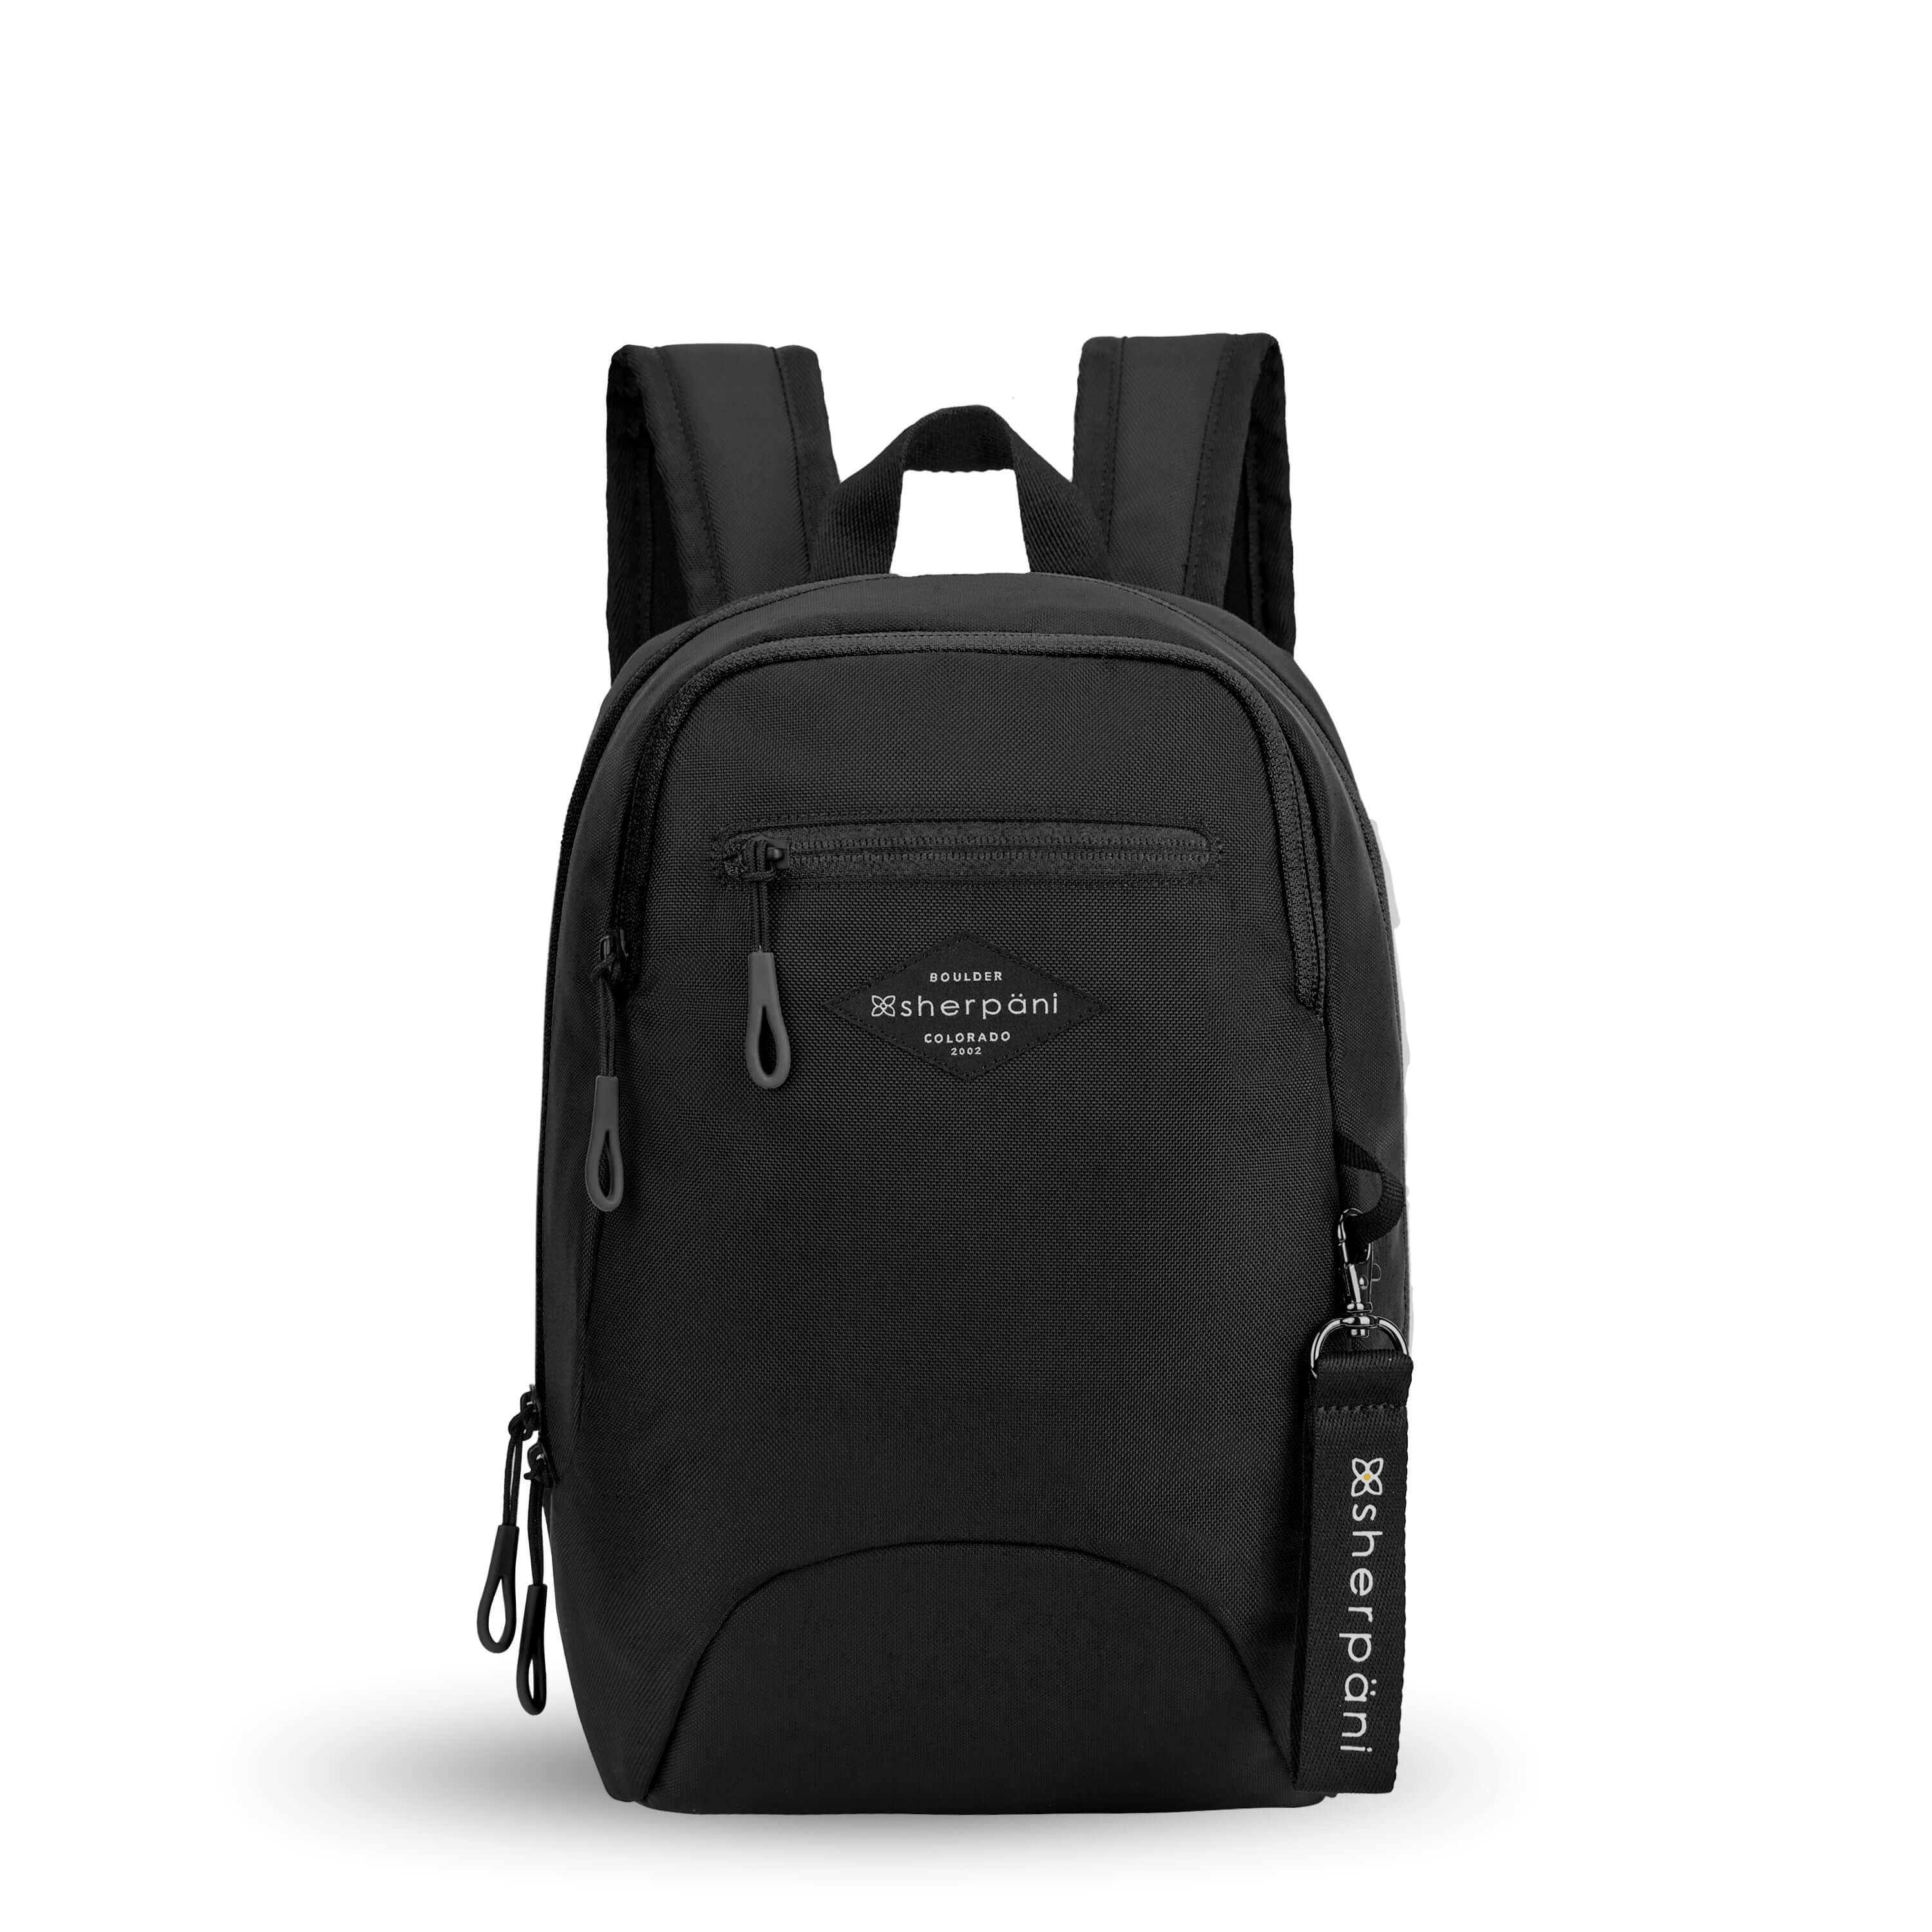 Flat front view of Sherpani mini backpack, the Vespa in Raven. The bag is black in color and features easy-pull zippers accented in black. It has padded and adjustable backpack straps, as well as a tote handle for easy carrying. The bag has a main zipper compartment, a smaller secondary zipper compartment and an external zipper pocket on the front. A branded Sherpani keychain is clipped to a fabric loop on the front of the bag.